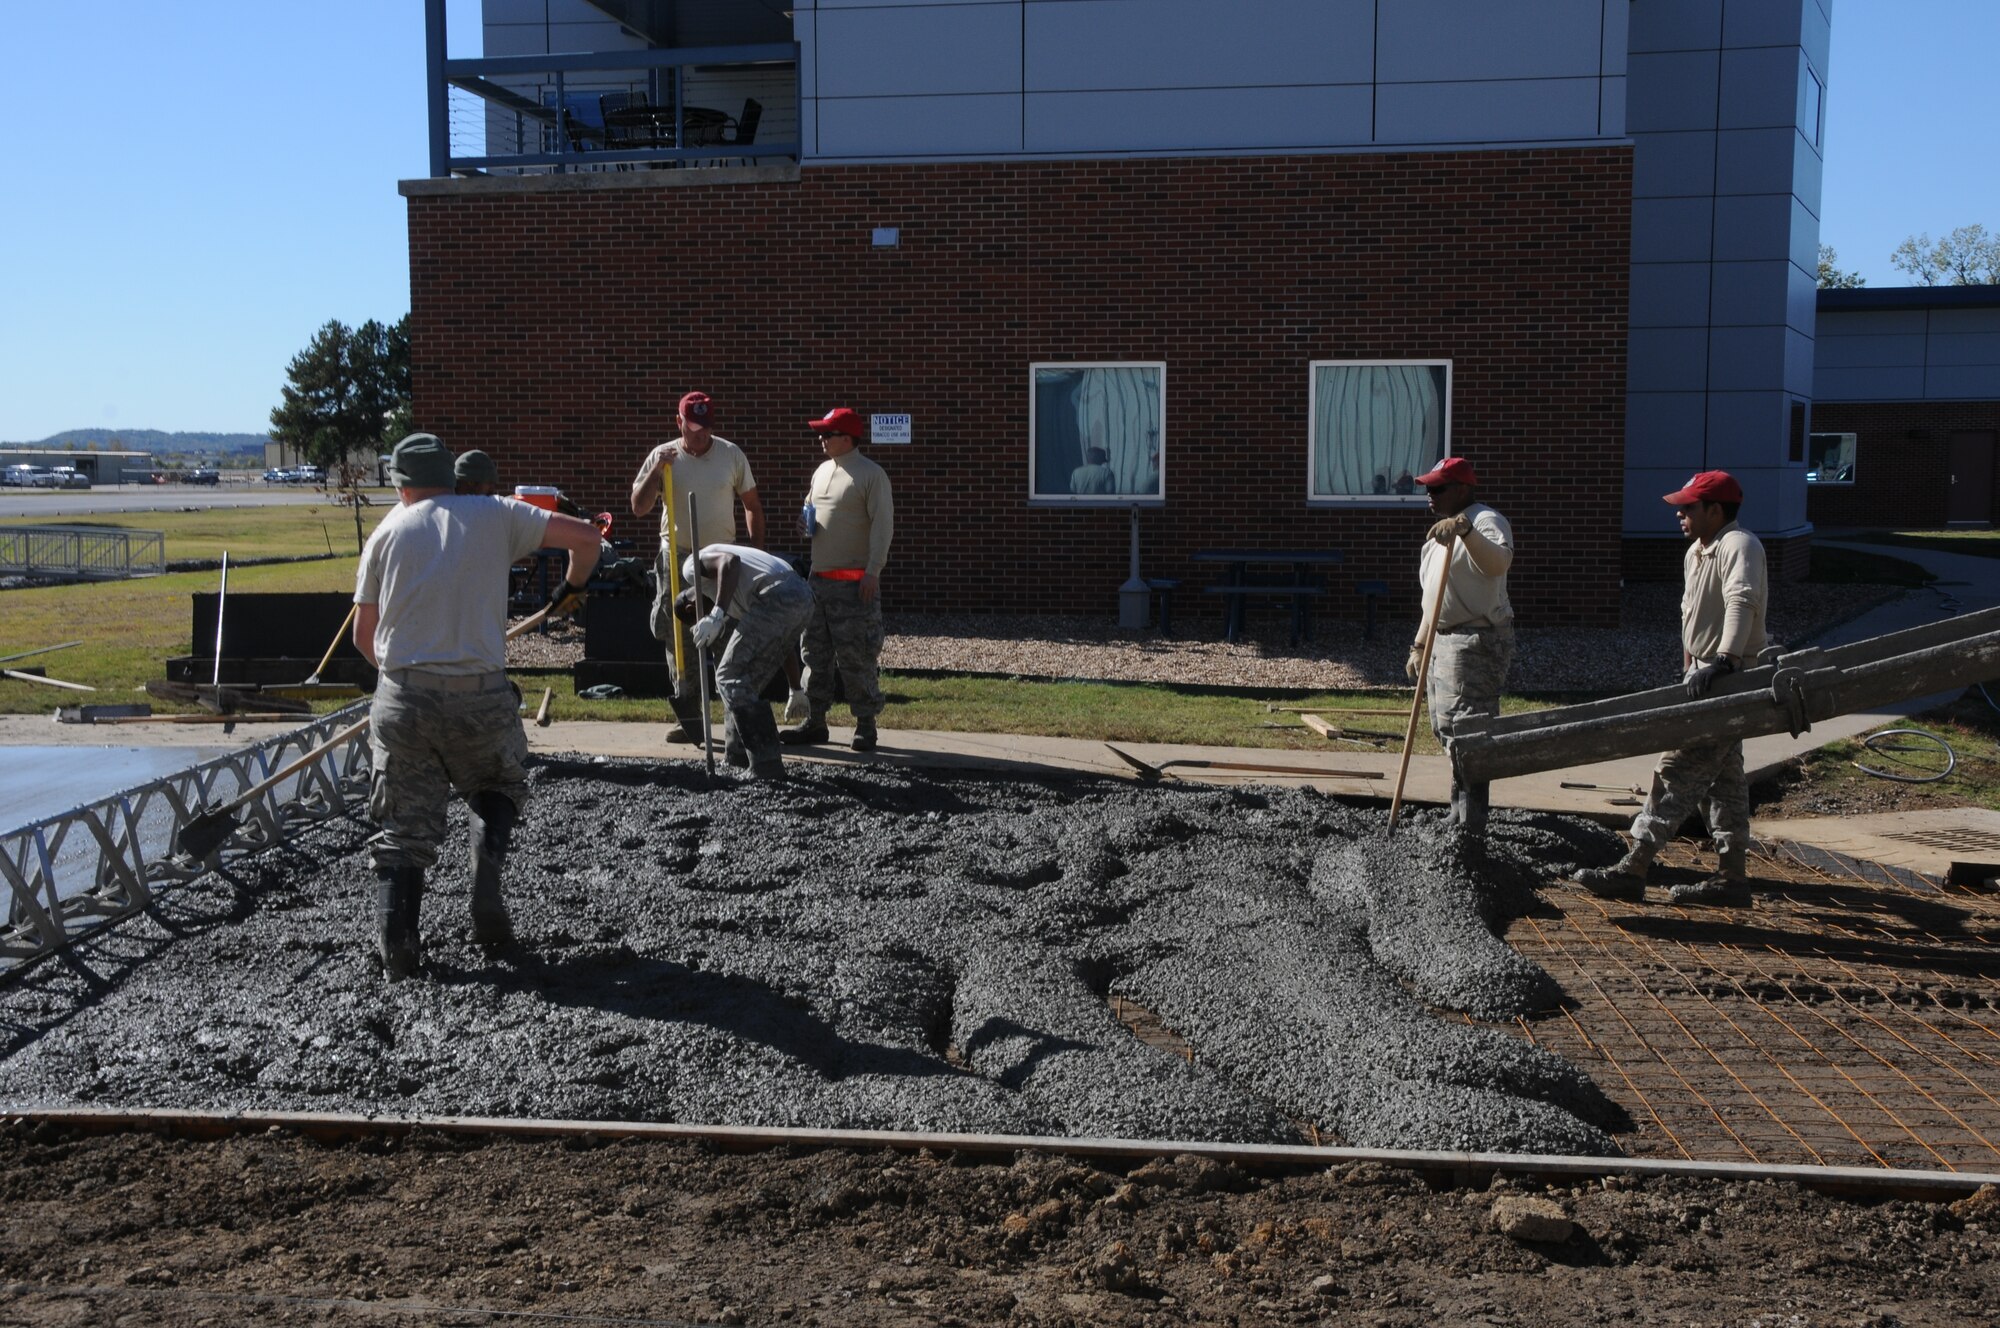 Members of the 567th Rapid Engineers Deployable Heavy Operations Repair Squadron Engineers (RED HORSE) Squadron (RHS) replace a gravel parking area with a concrete parking lot at Ebbing Air National Guard Base, Fort Smith, Ark., Nov. 6, 2014.The 567th RHS ventured to Ebbing Air National Guard Base to retrain  on its RED HORSE capabilities with the 188th Civil Engineering Squadron. The 567th is an Air Force Reserve unit based at Seymour Johnson Air Force Base, N.C. (U.S. Air National Guard photo by Airman 1st Class Cody Martin/Released)